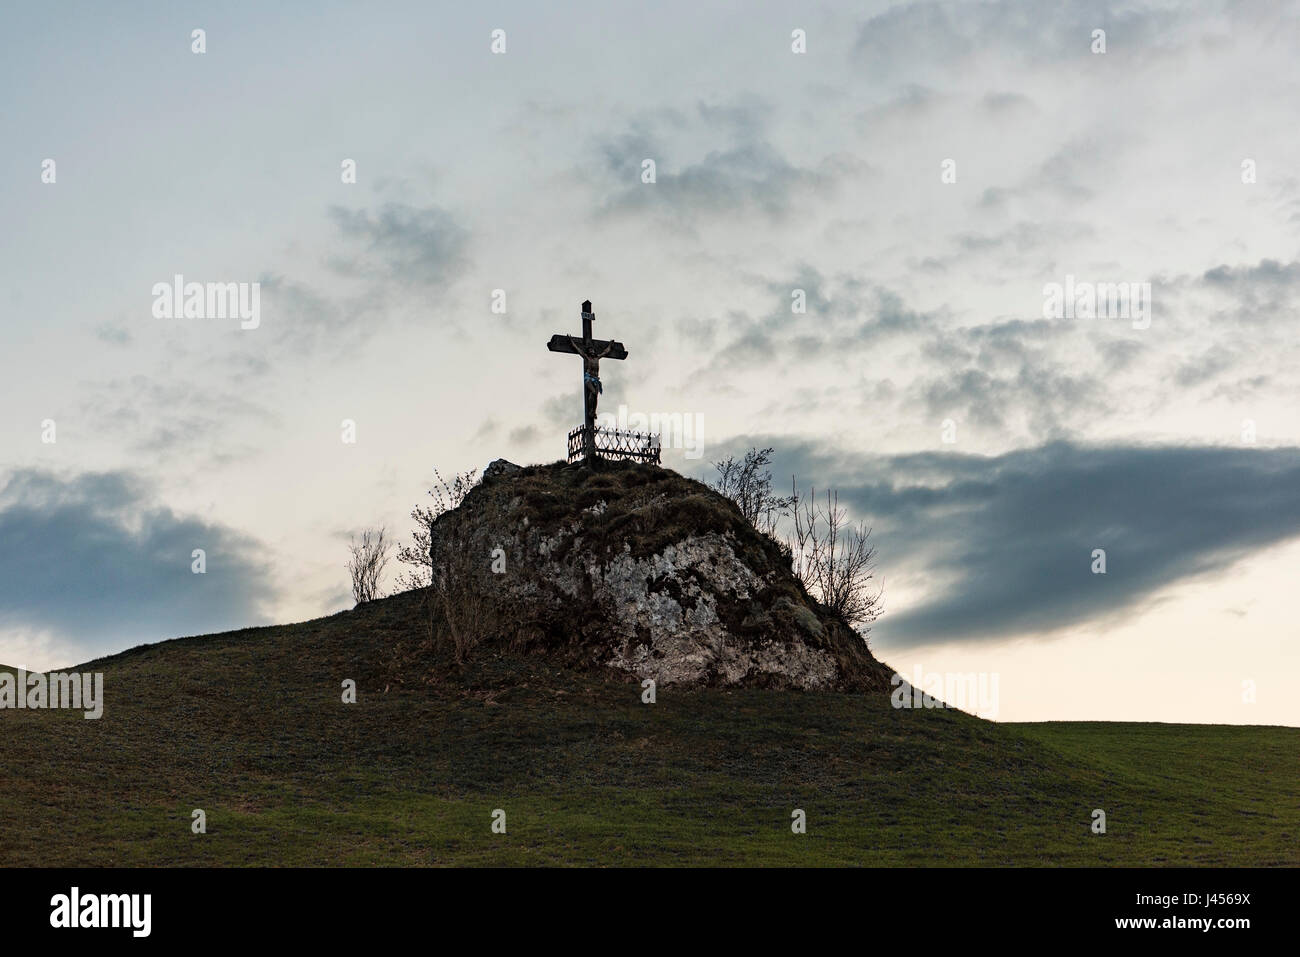 A Holy cross in a rural landscape of the area surrounding the Swiss town of Appenzell, Switzerland. Derek Hudson / Alamy Stock Photo Stock Photo